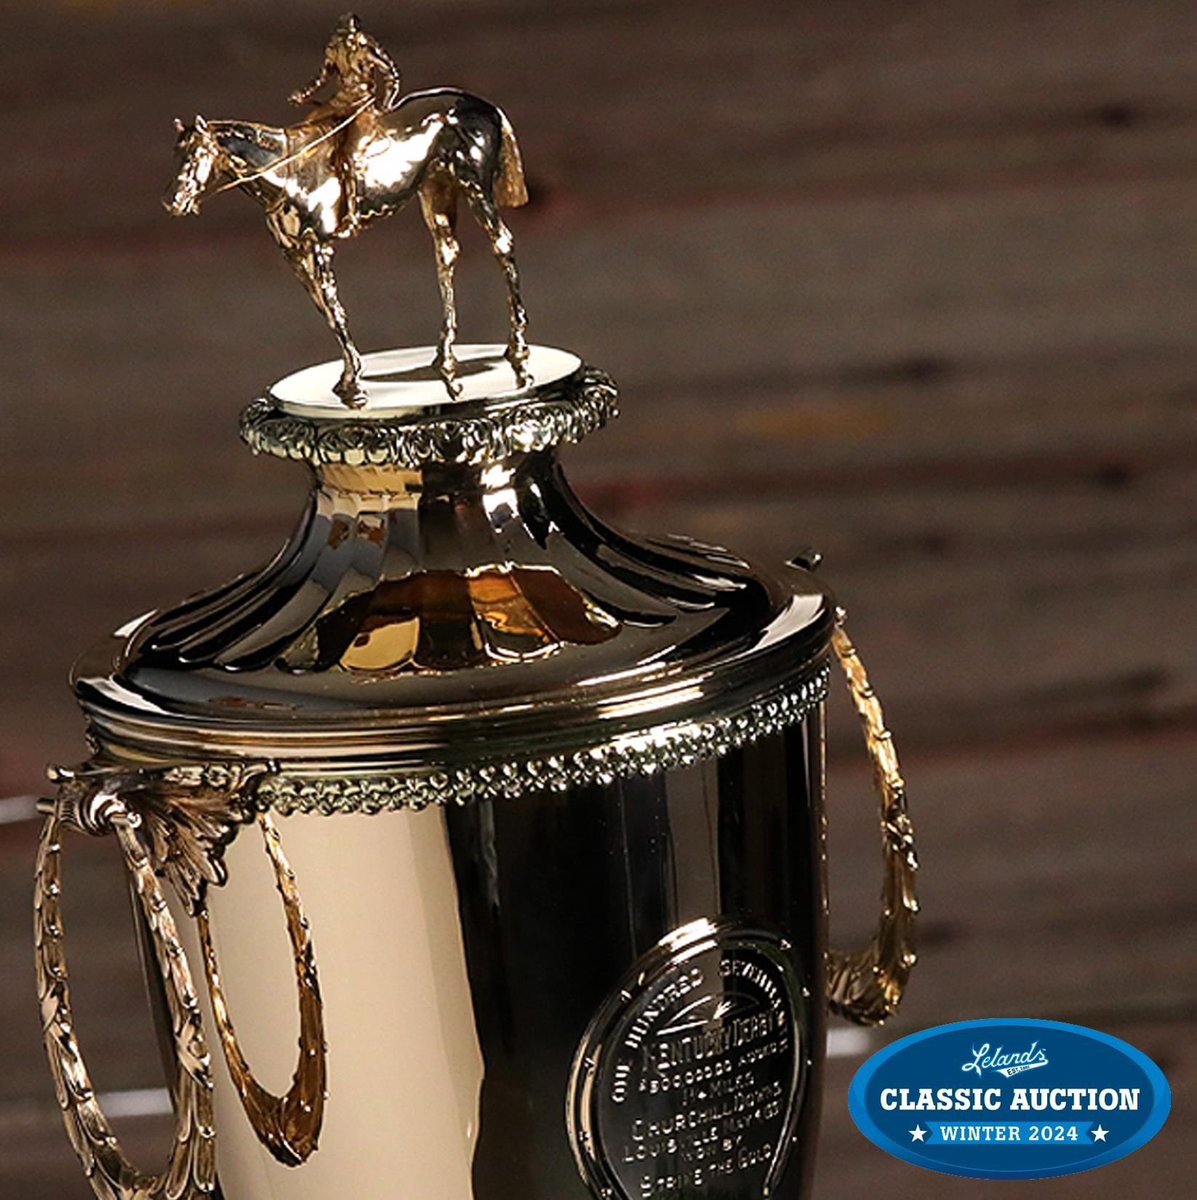 Bid now on the 1991 Kentucky Derby Owner's Trophy awarded to the owner of Strike the Gold. These prestigious Kentucky Derby owner trophies are seldom available for sale, making this a truly unique chance to own a piece of racing history. auction.lelands.com